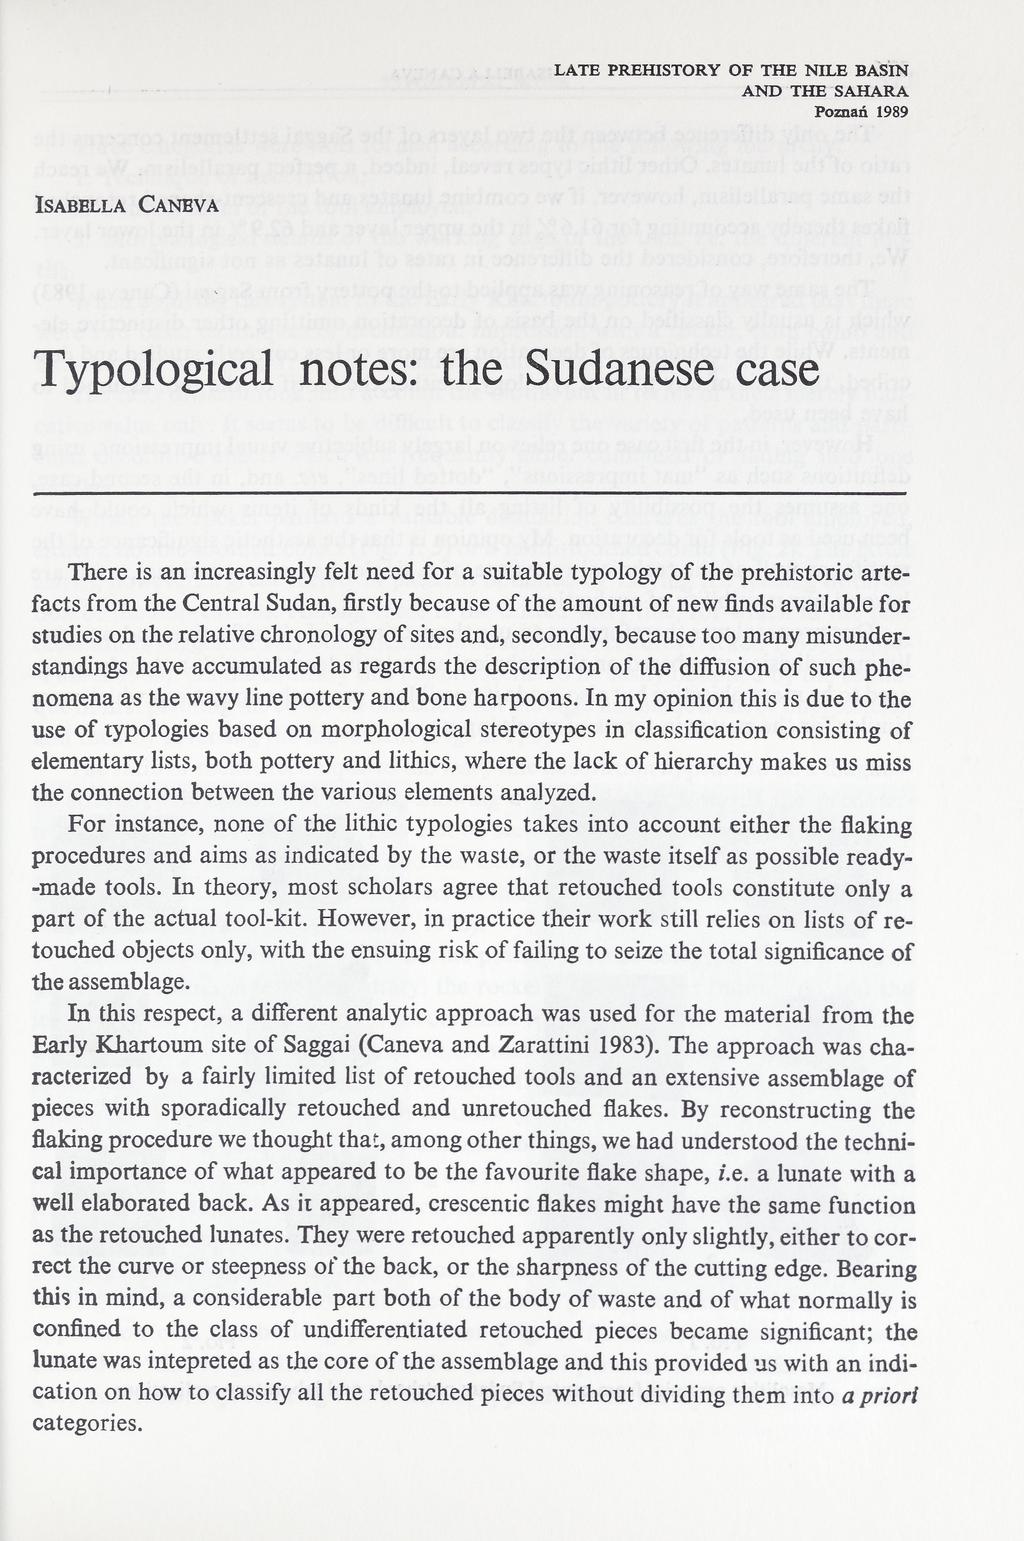 LATE PREHISTORY OF THE NILE BASIN AND THE SAHARA Poznan 1989 Typological notes: the Sudanese case There is an increasingly felt need for a suitable typology of the prehistoric artefacts from the